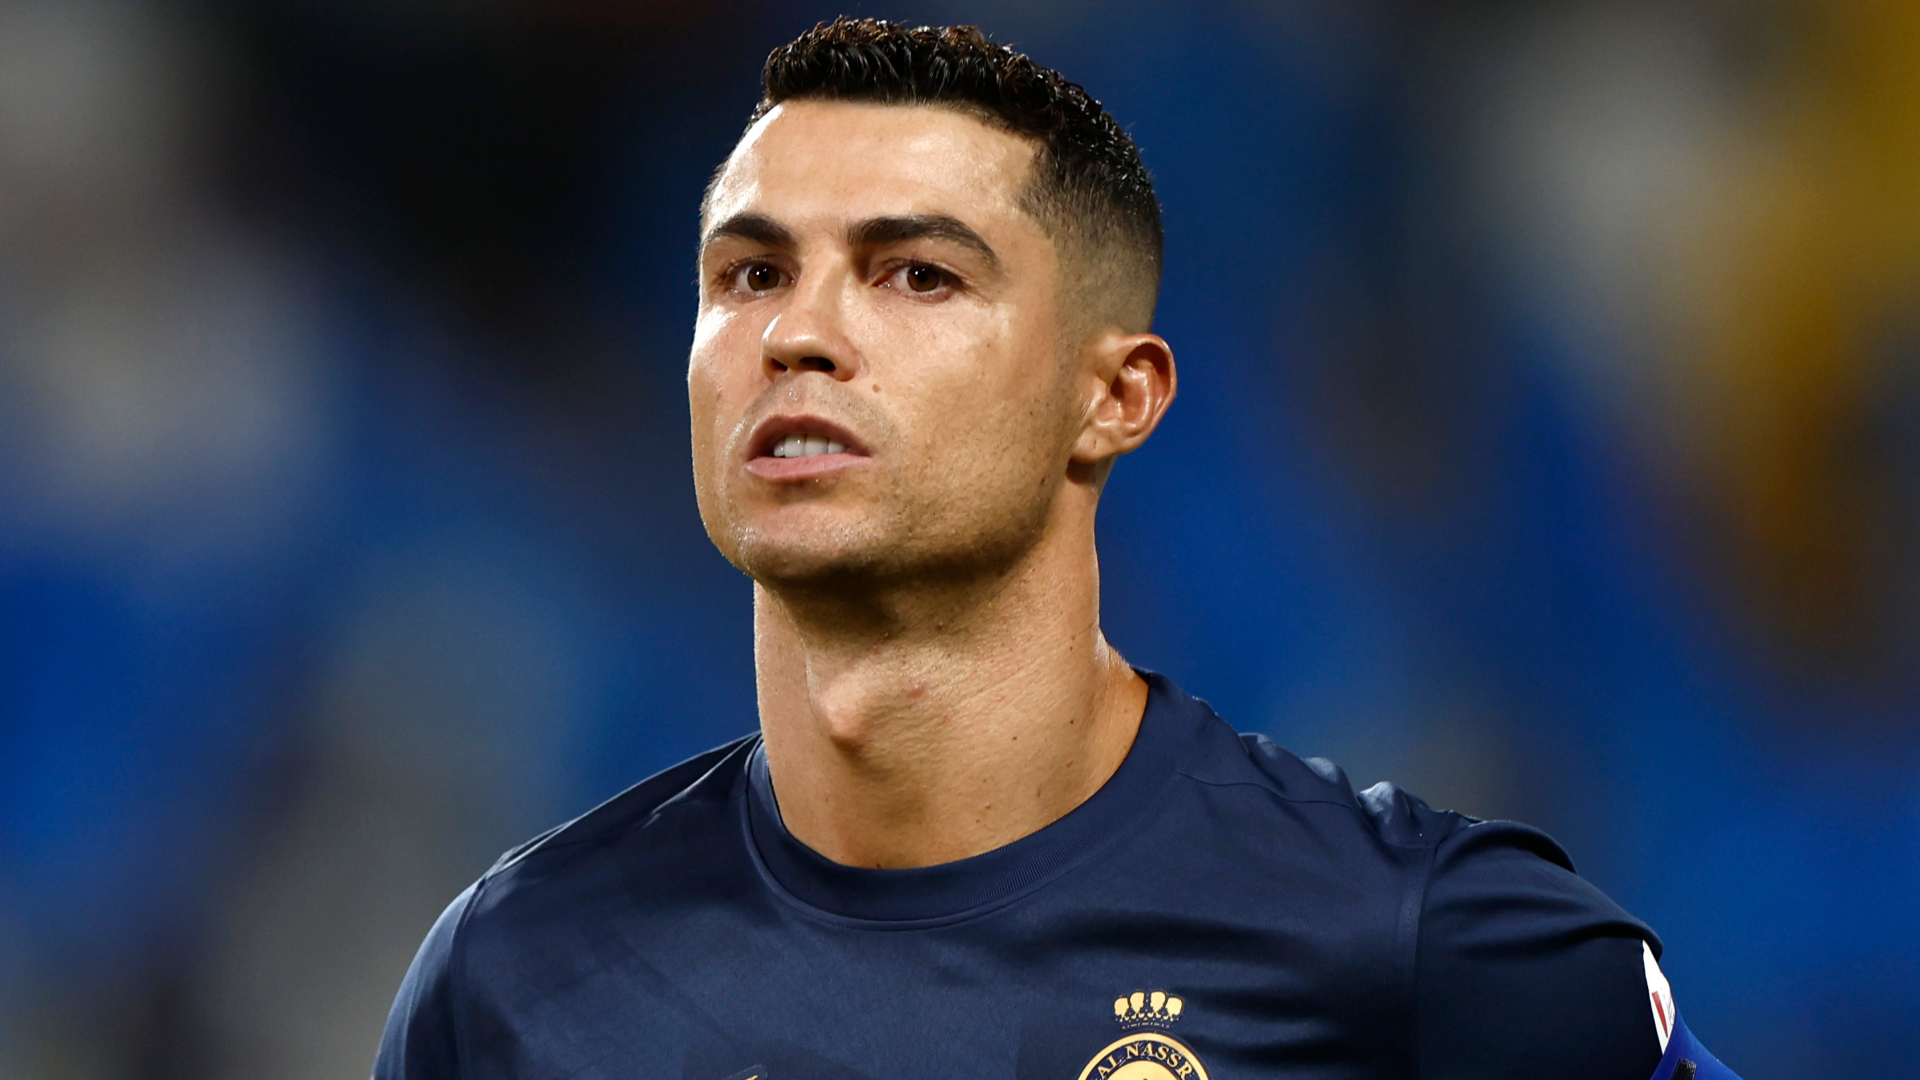 Cristiano Ronaldo just shaved all of his hair off - have you seen?